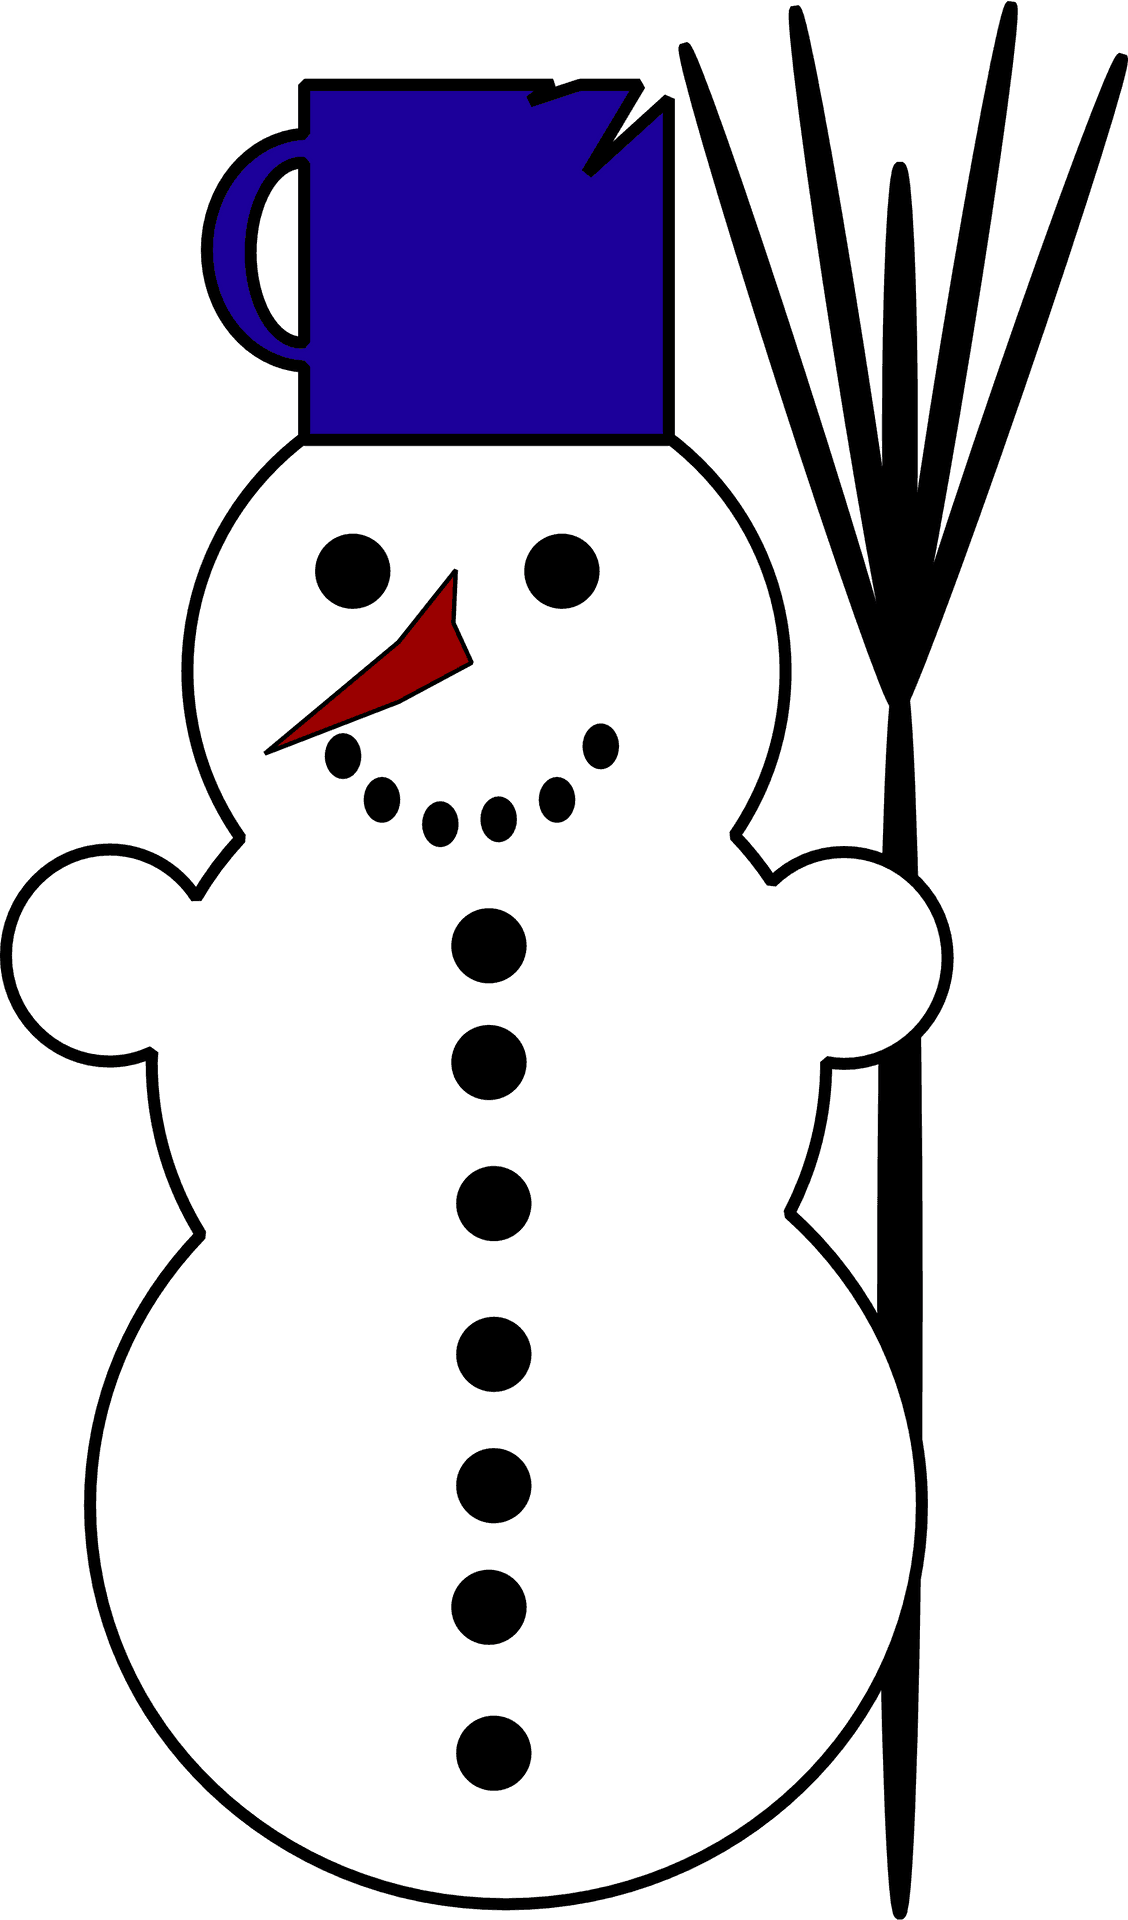 Snowmanwith Top Hatand Broom Clipart PNG